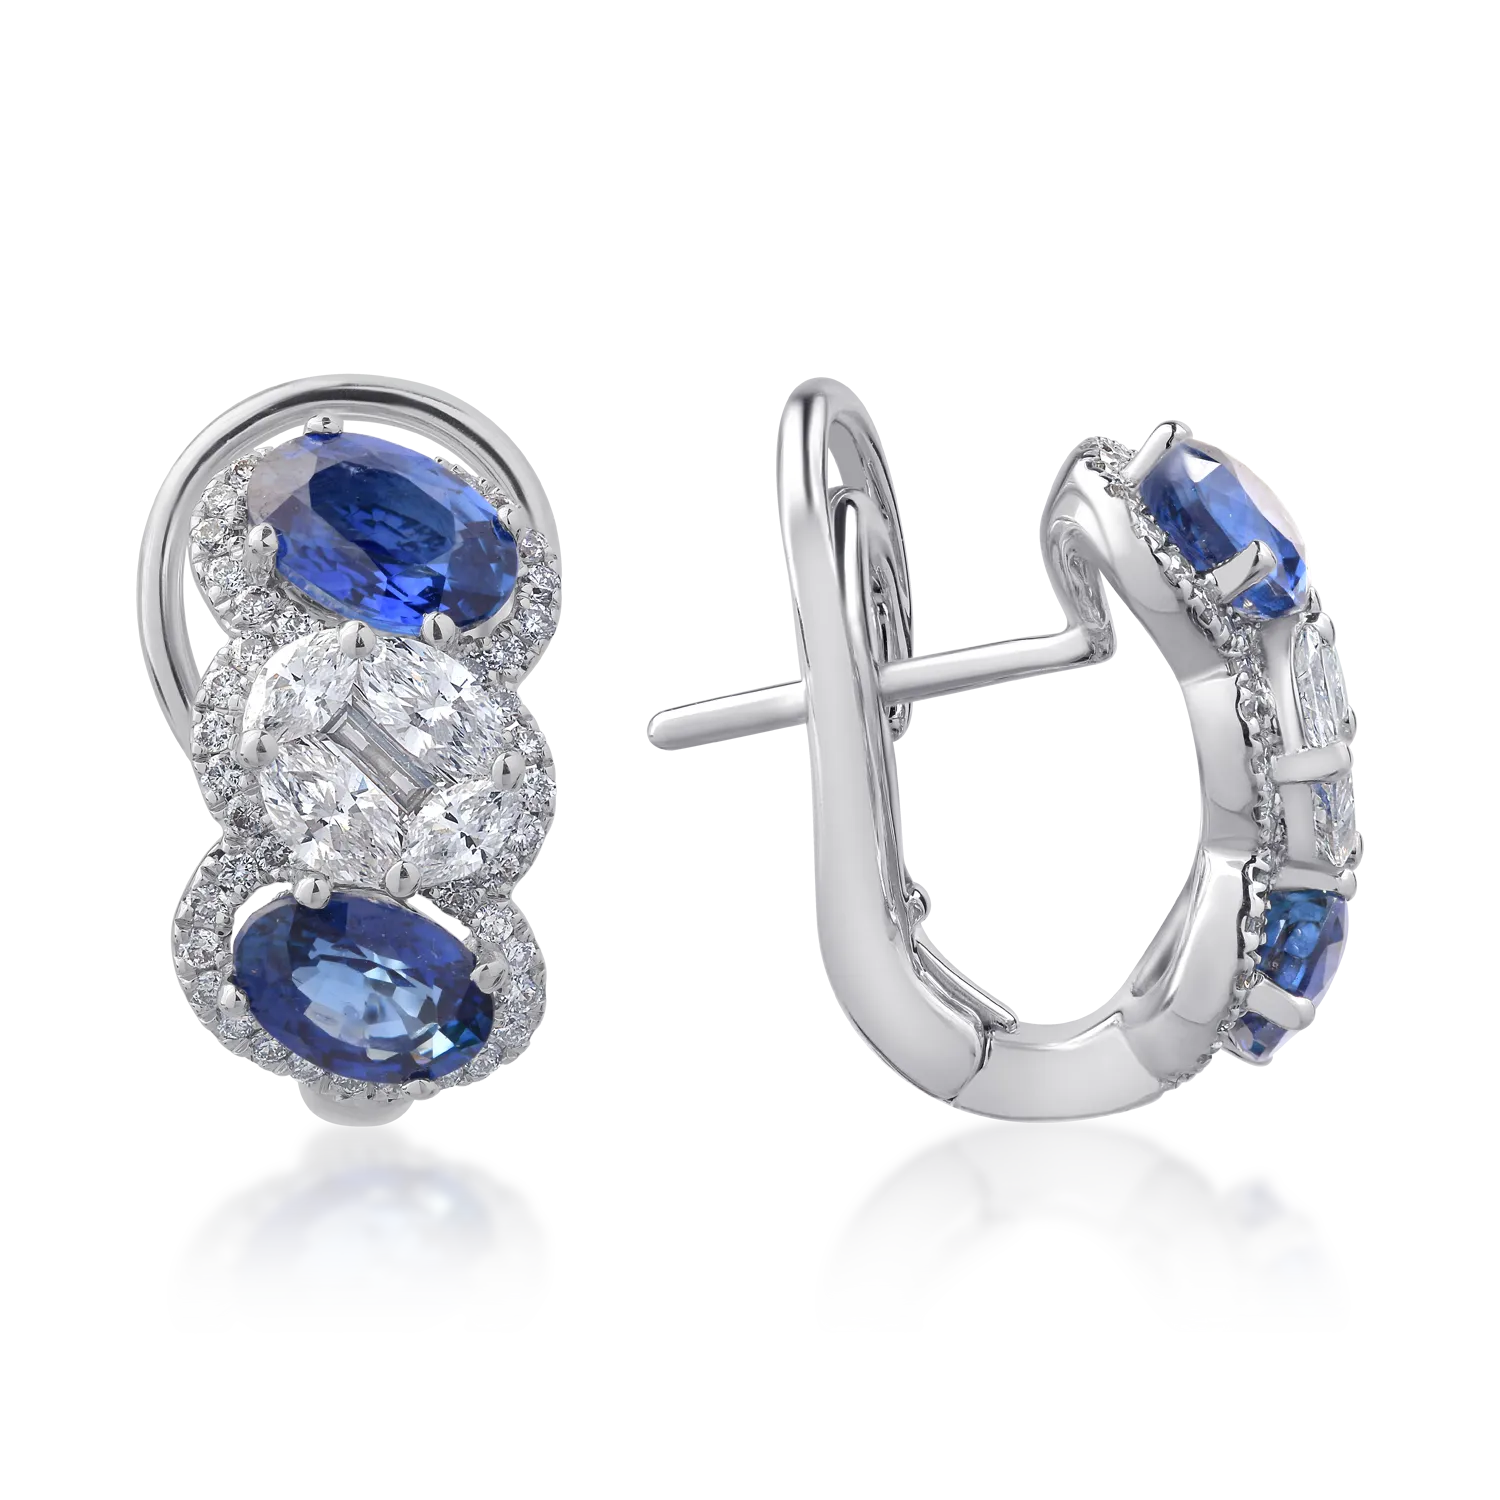 18K white gold earrings with 2.26ct sapphires and 0.52ct diamonds